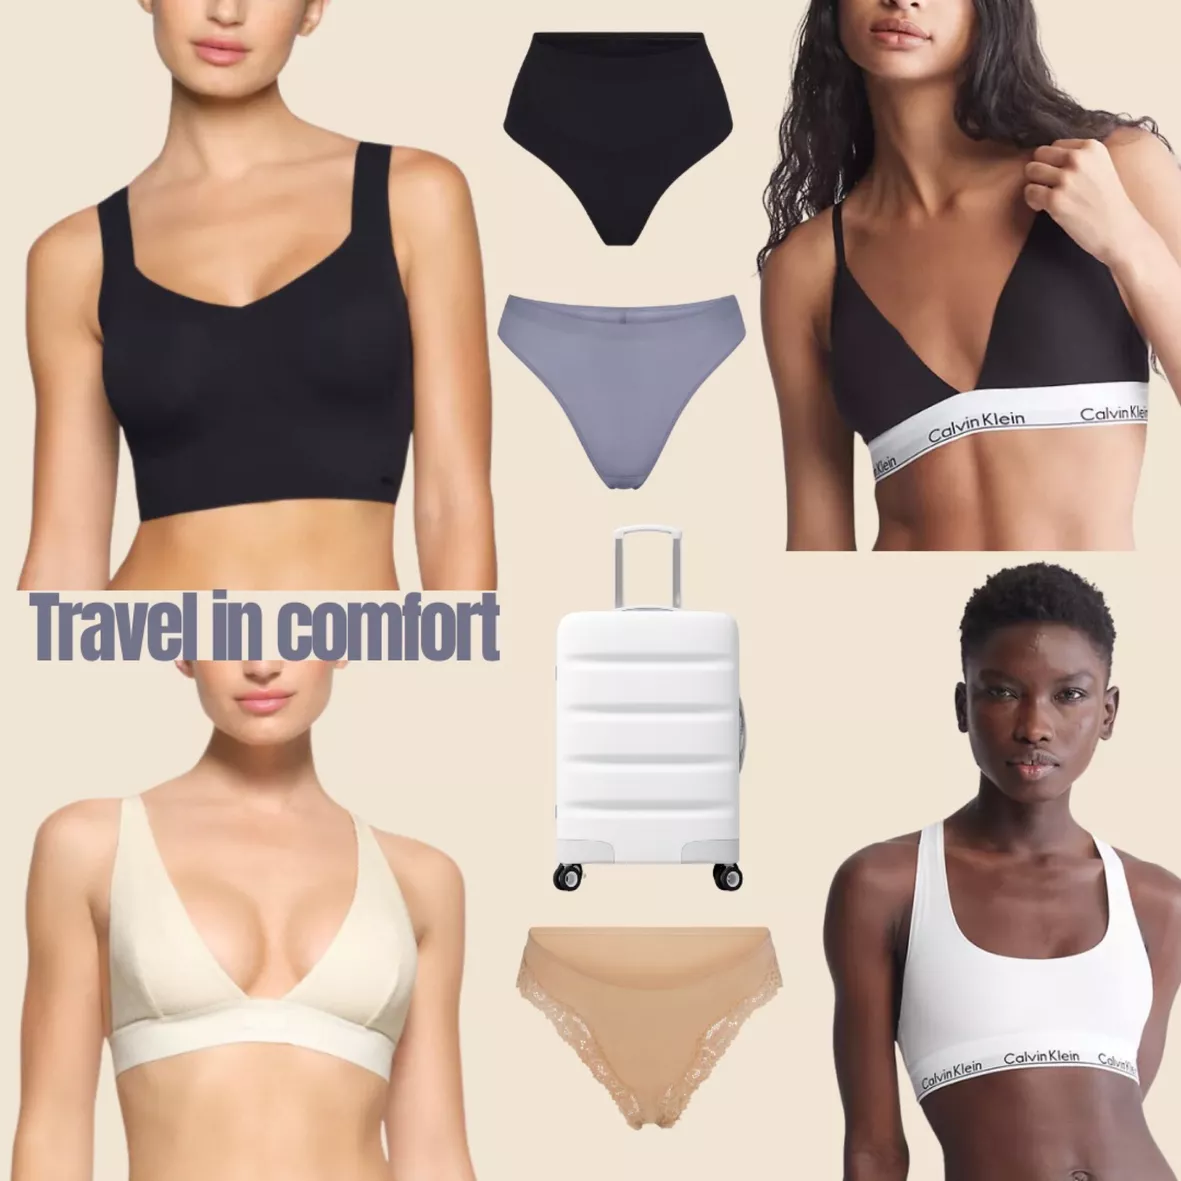 Do You Take Lingerie on Vacation?